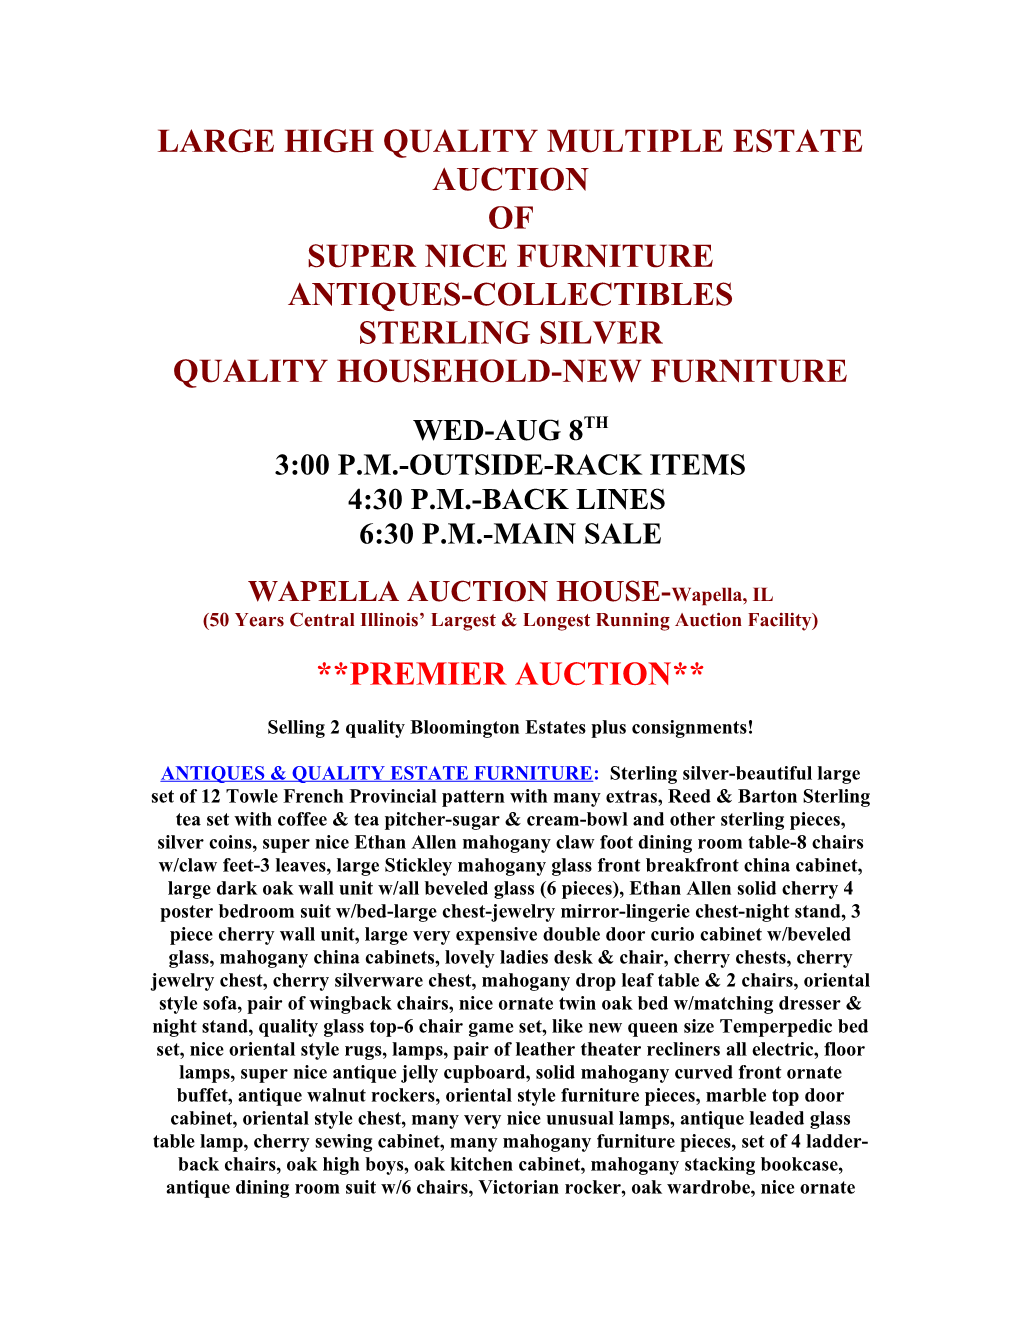 Large High Quality Multiple Estate Auction